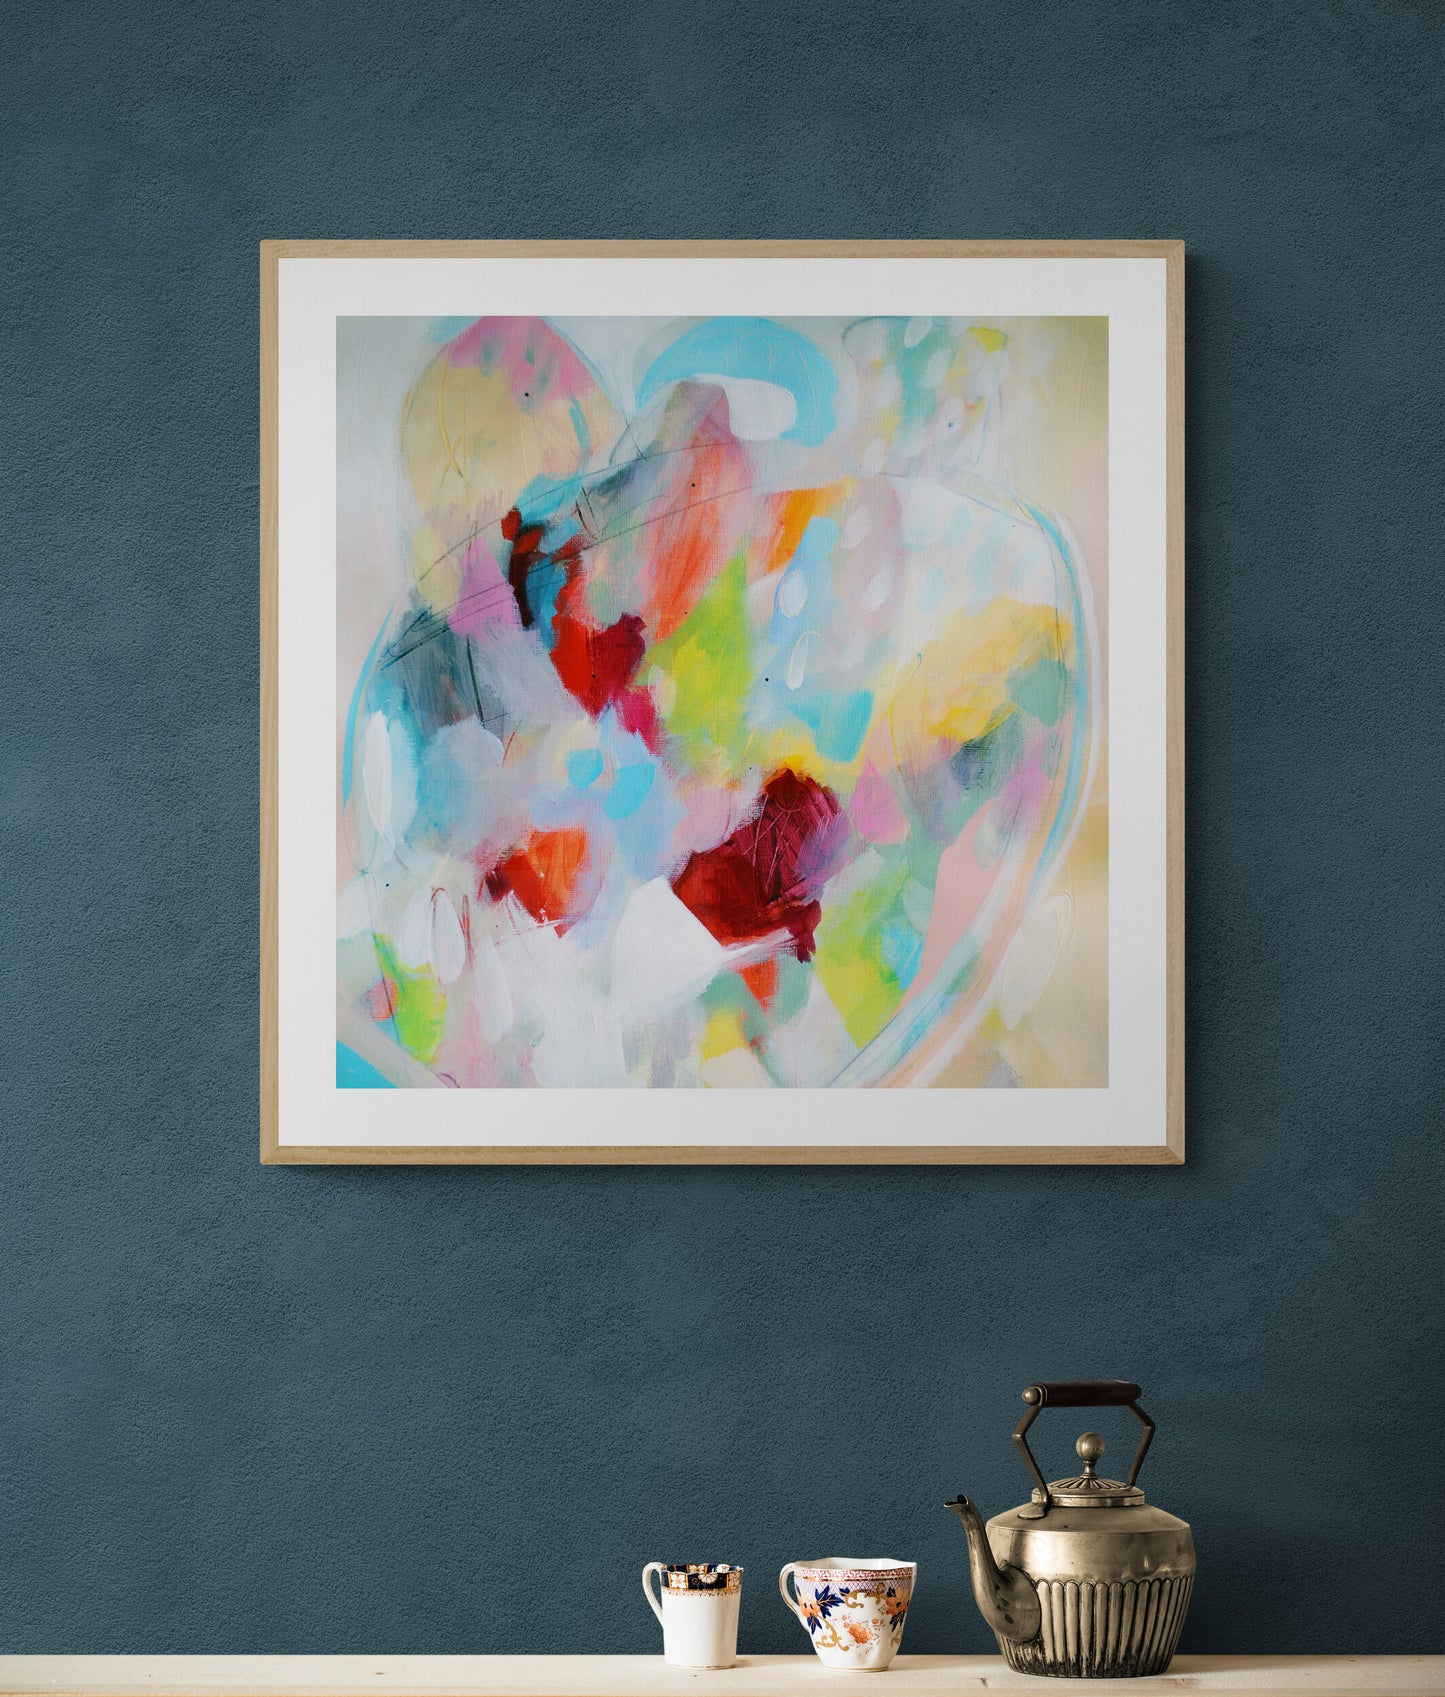 Multicoloured Abstract Art Giclee Print on Stretched Canvas or Fine Art Paper - Henrietta